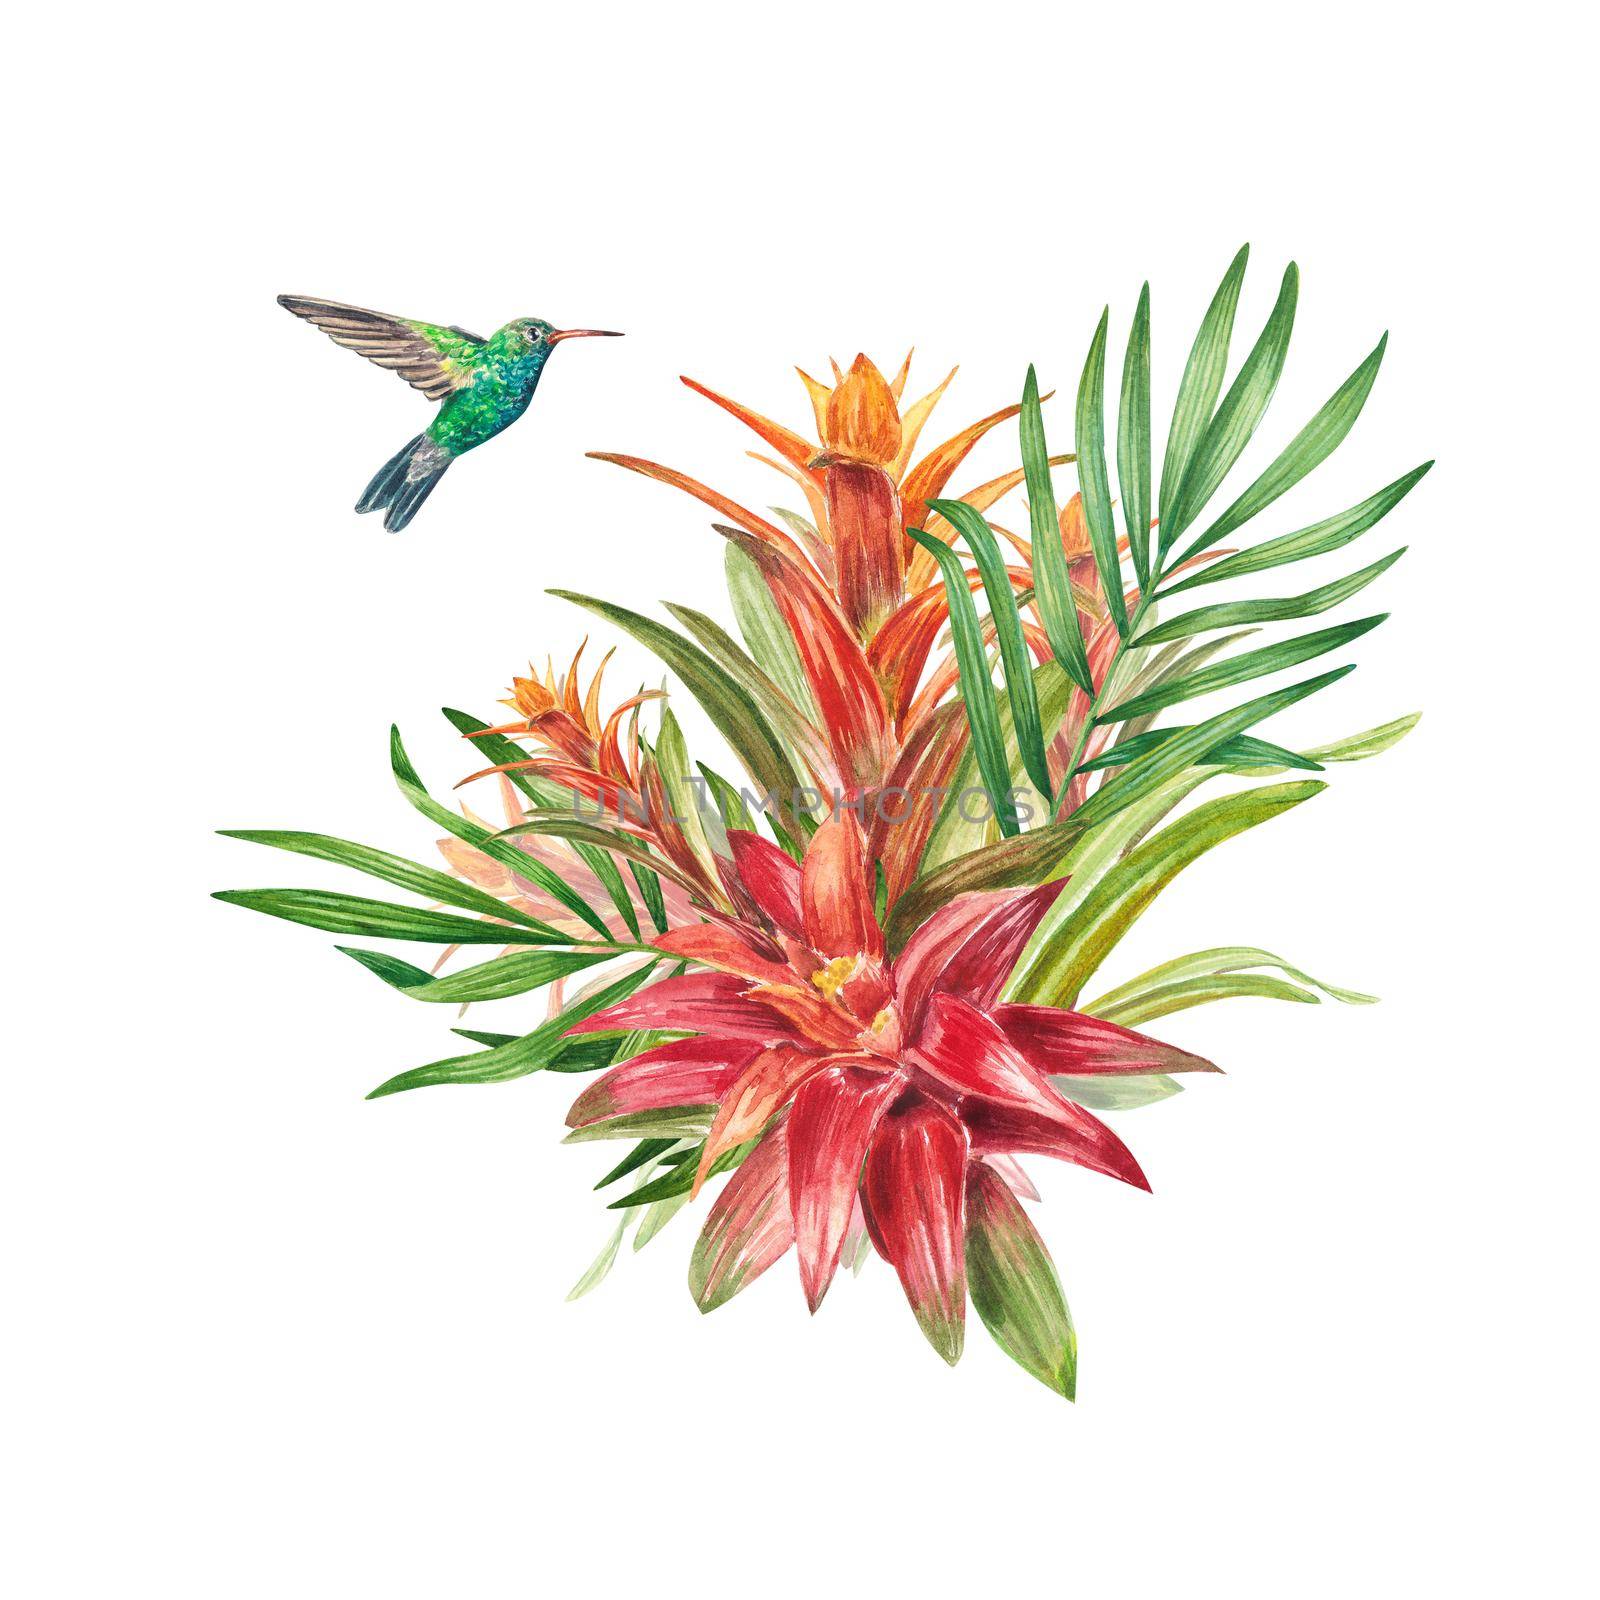 A tropical bromeliad plant with red leaves and a hummingbird, painted in watercolor. The illustration is highlighted on a white background. Spring or summer flower for wedding invitations, postcards.